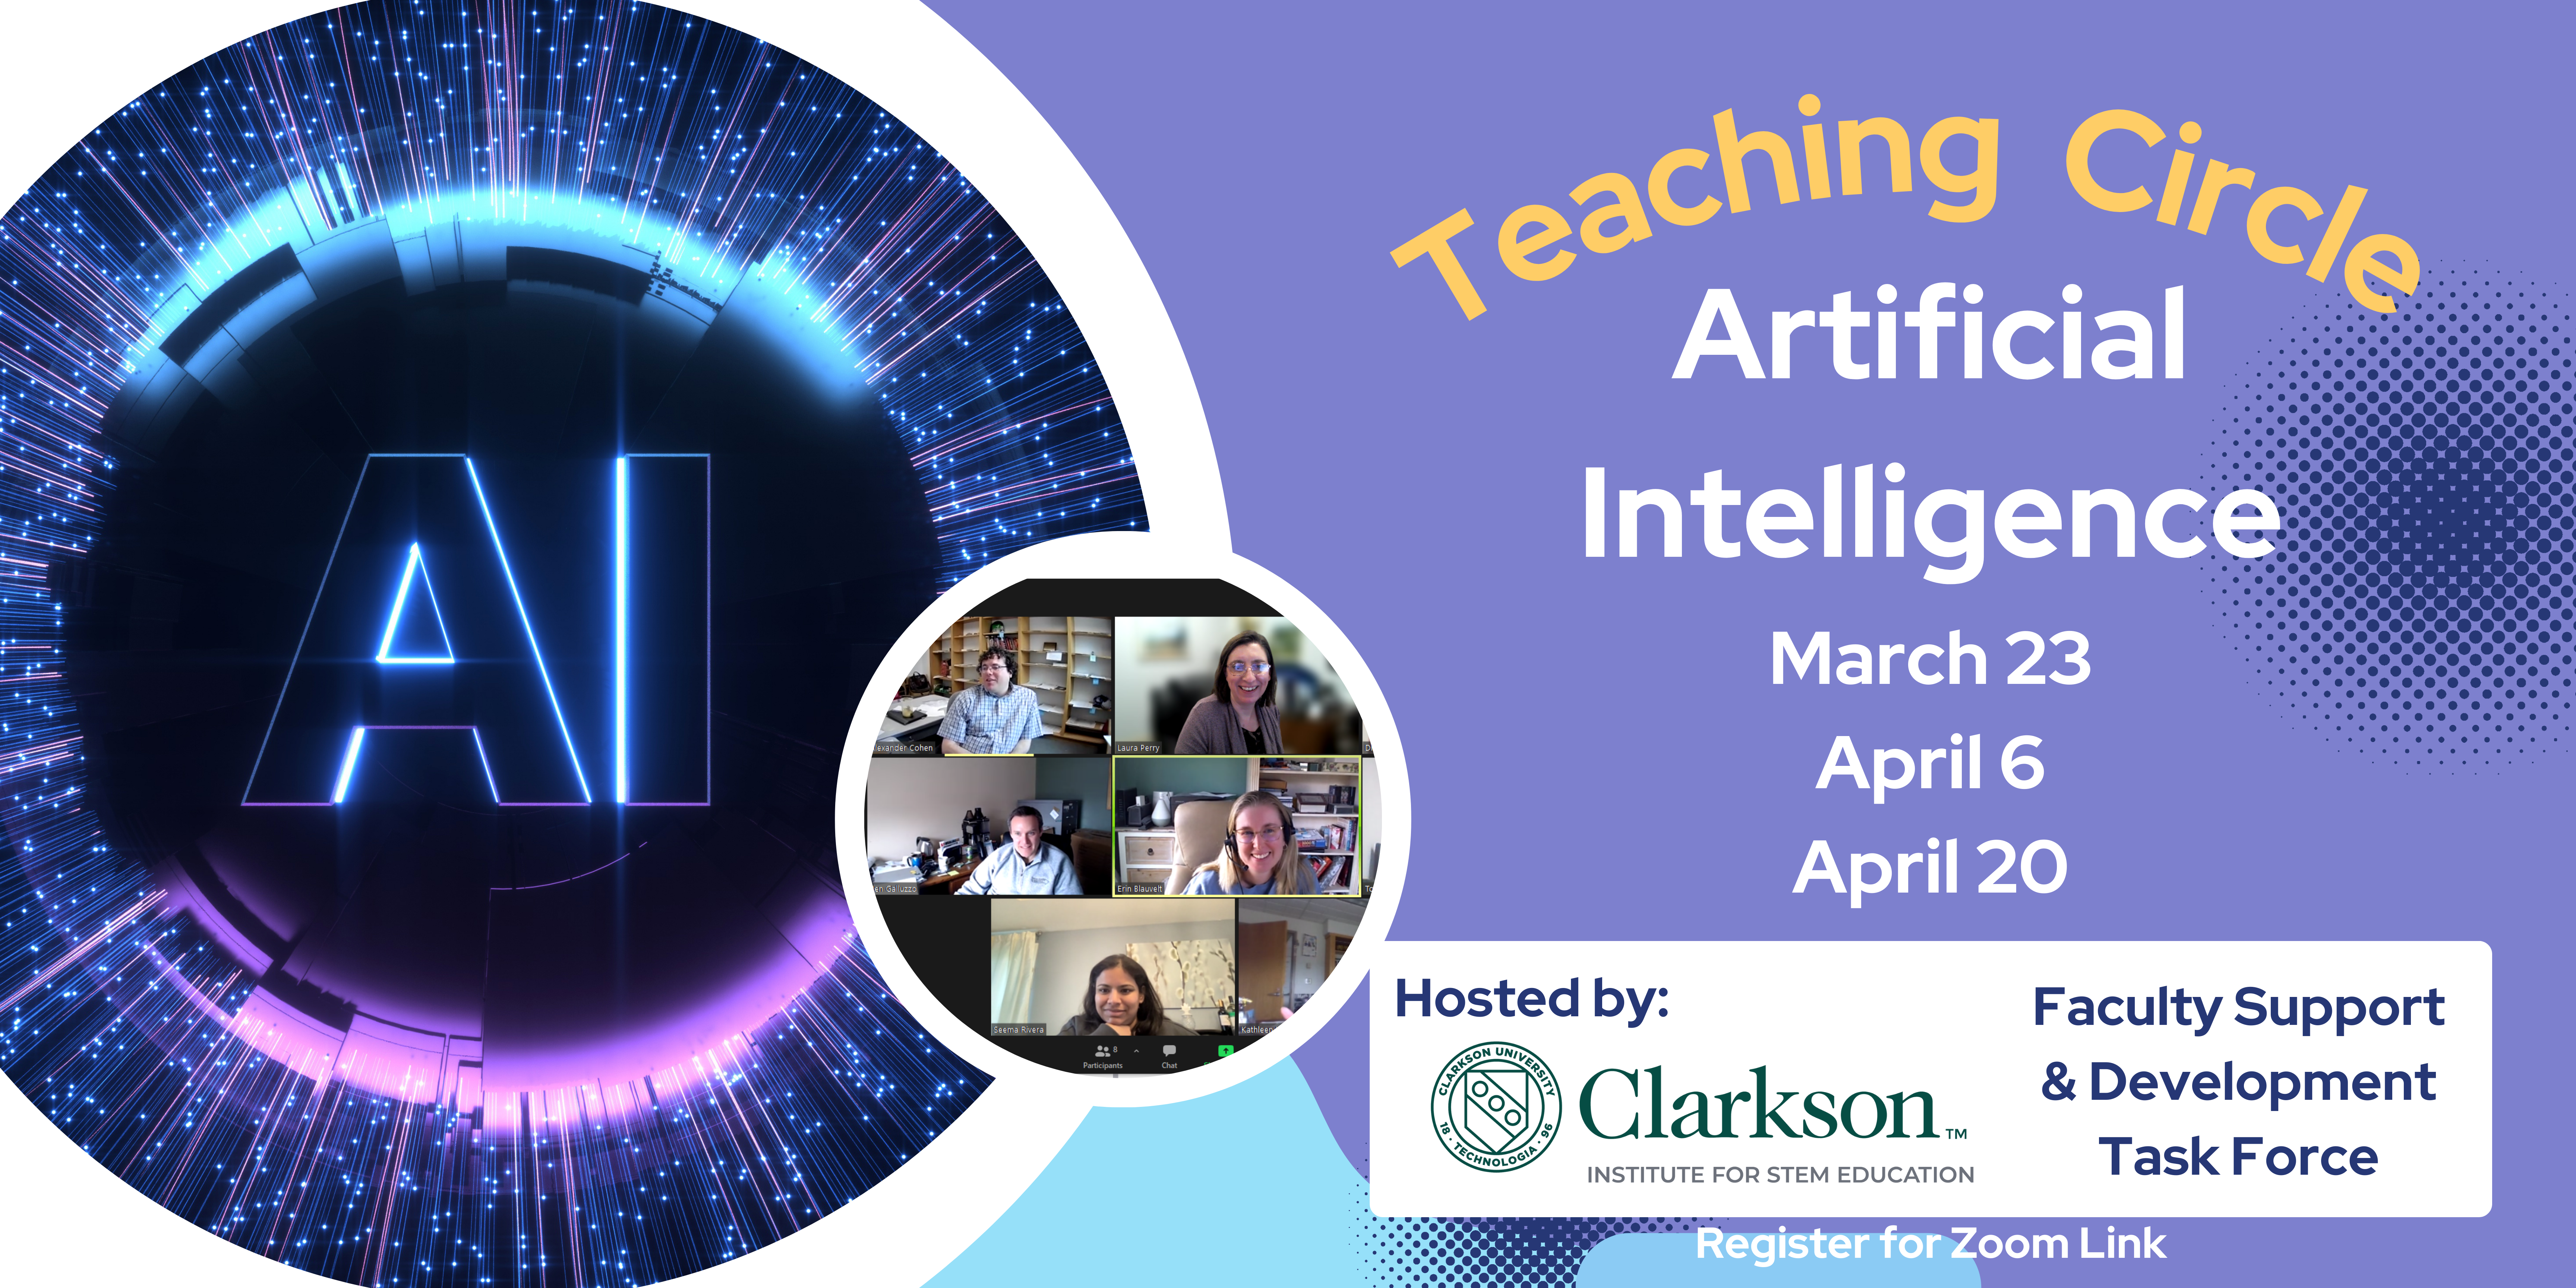 Discussing Artificial Intelligence at Clarkson’s Next Teaching Circle: March 23